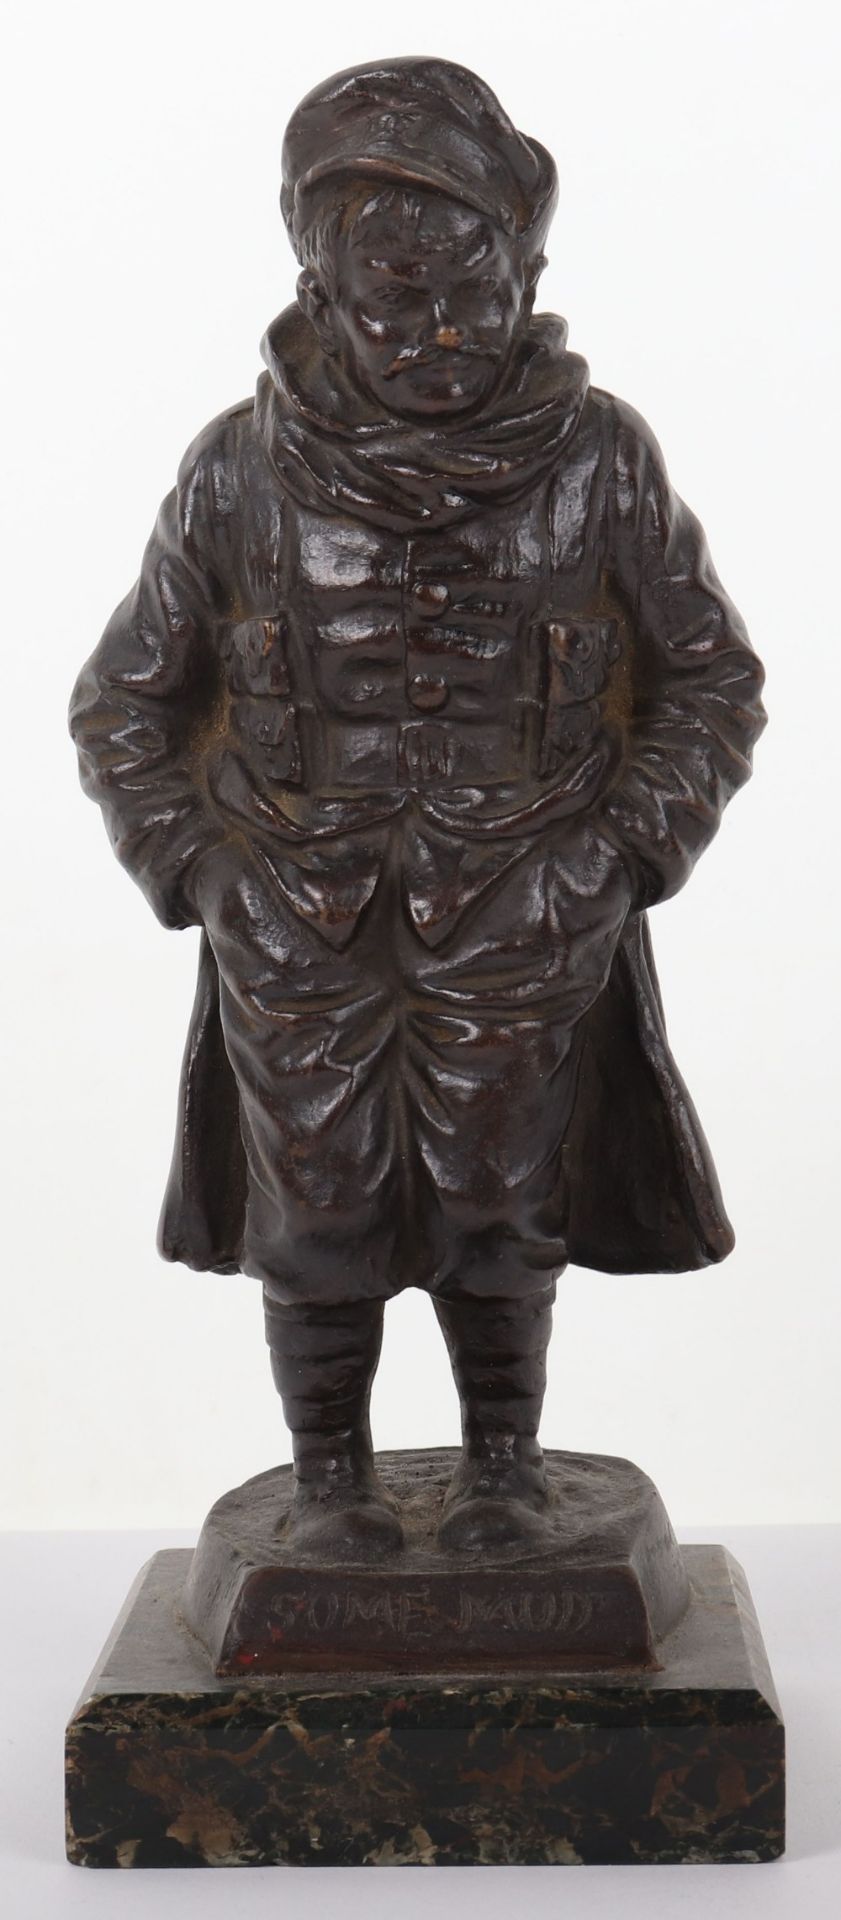 Bronze Figure of a WW1 British Tommy in the Bruce Bairnsfather “Old Bill” Style